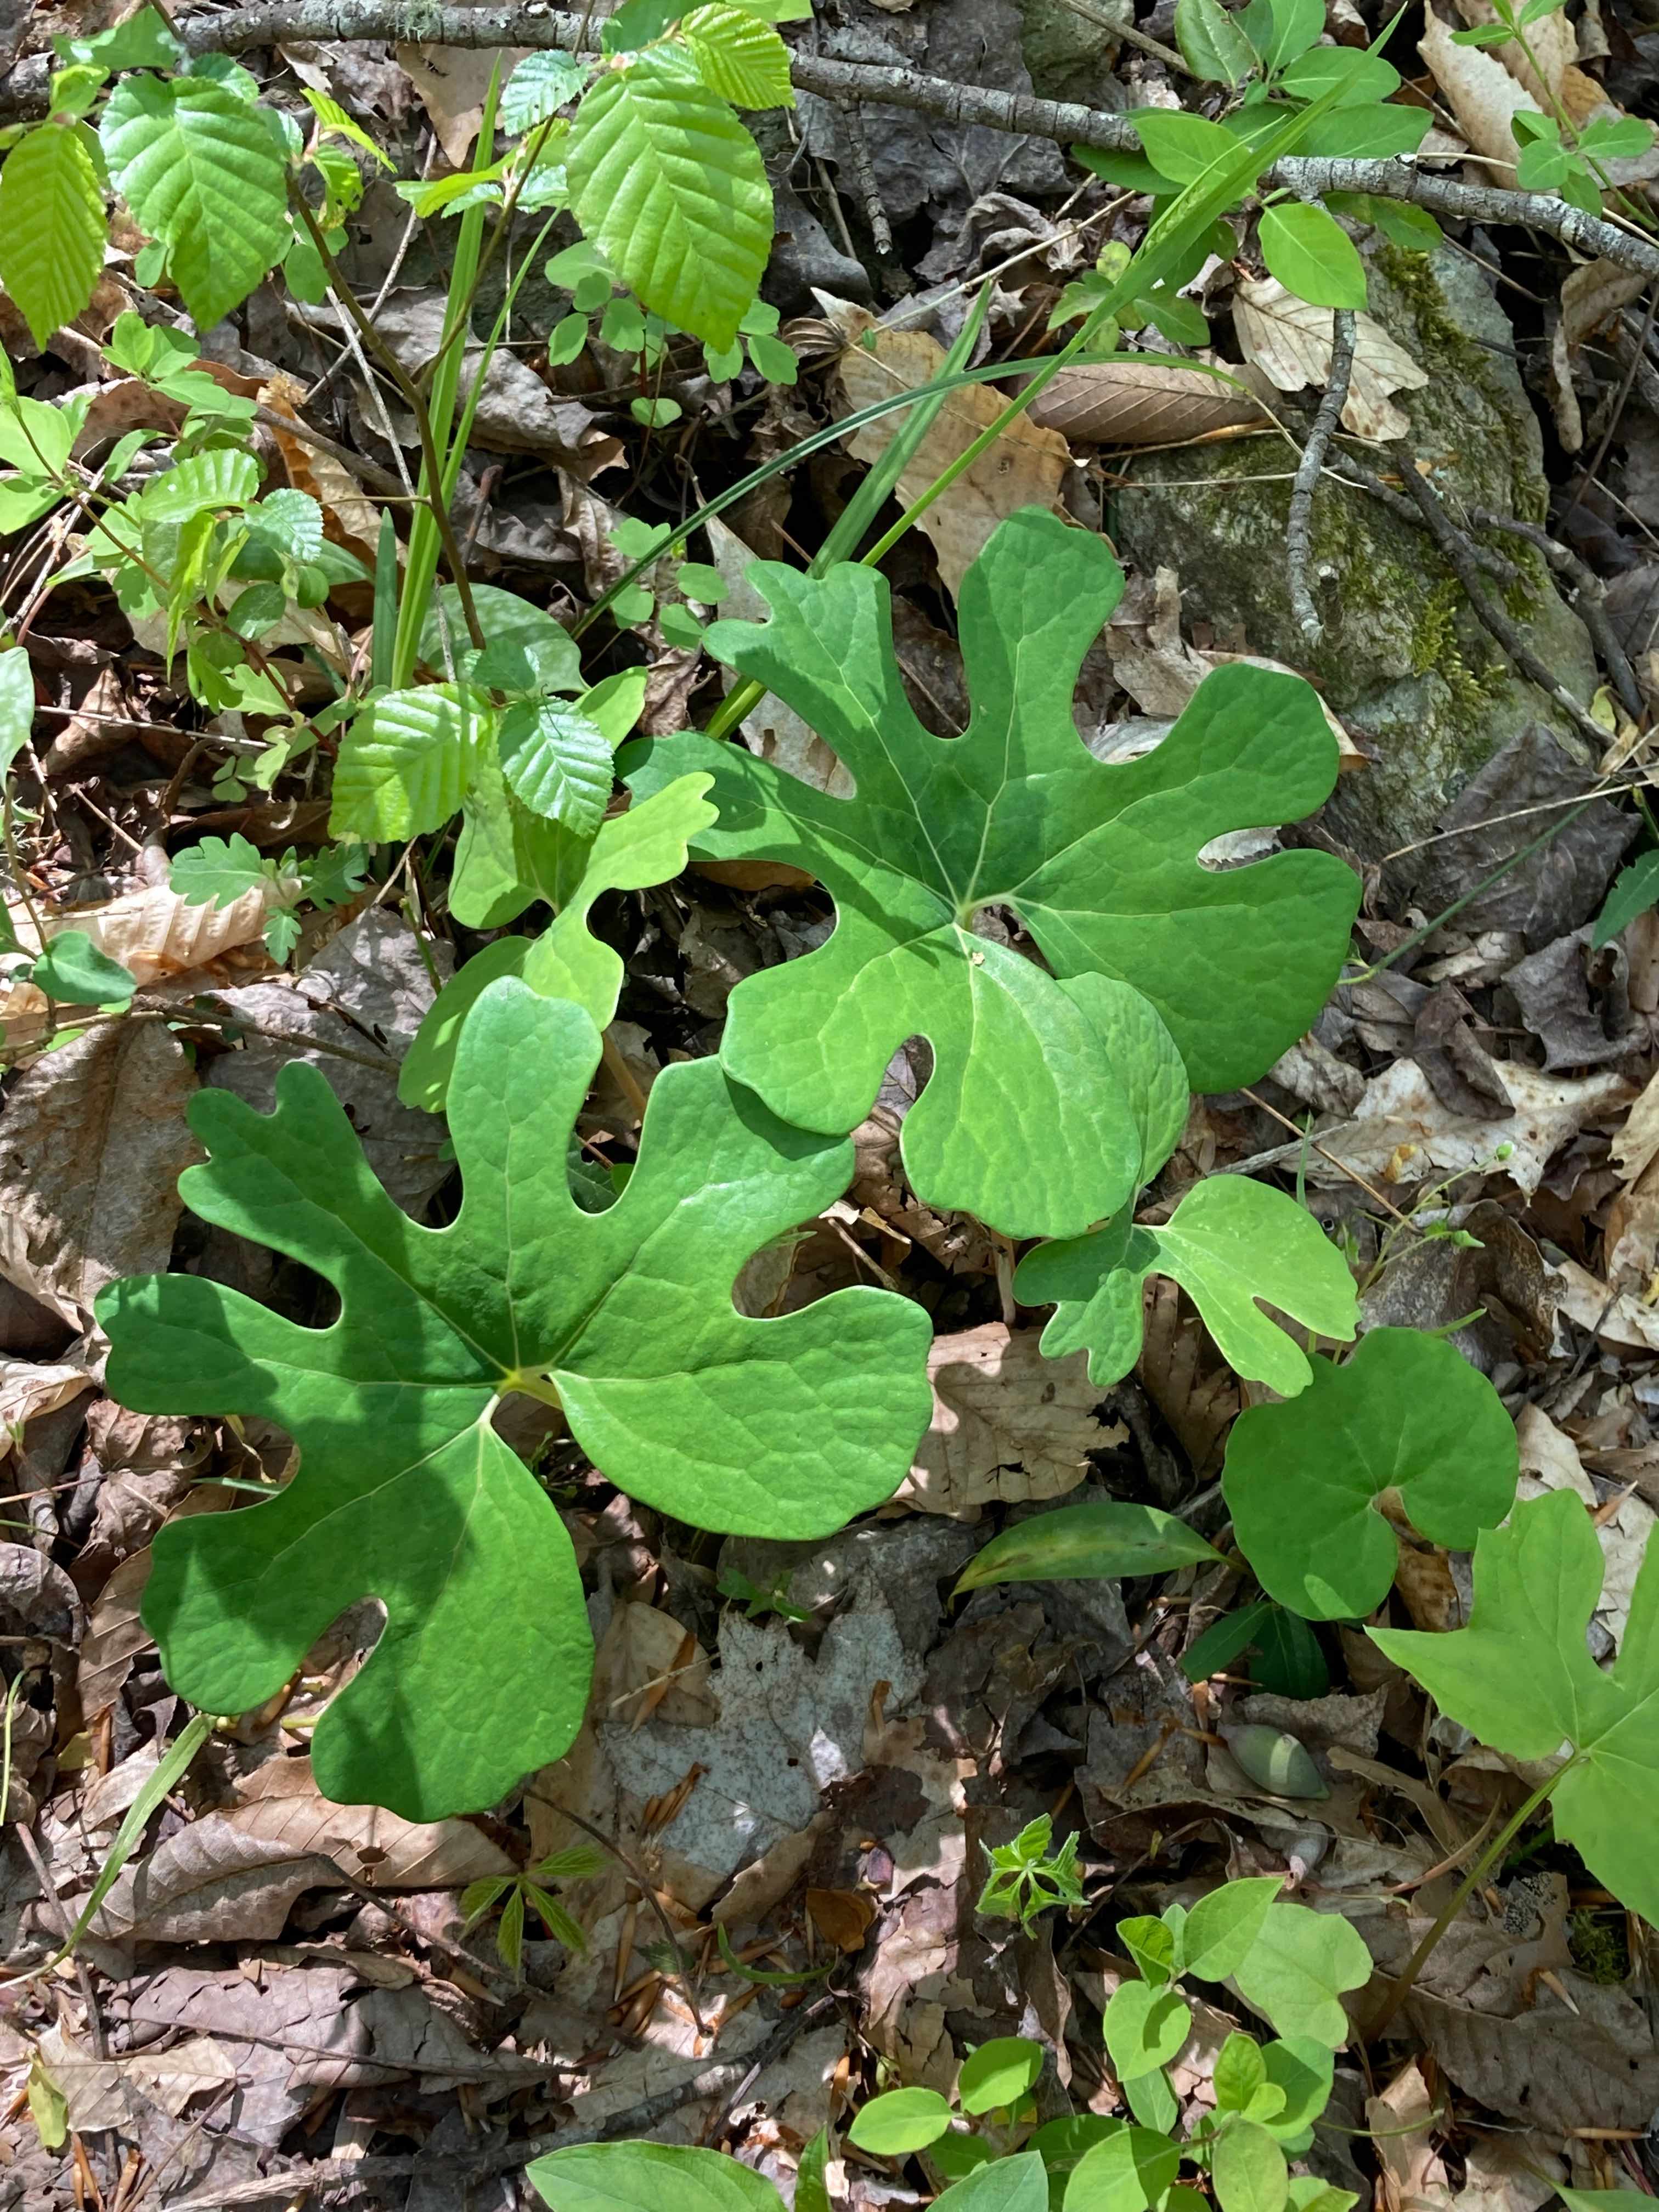 The Scientific Name is Sanguinaria canadensis. You will likely hear them called Bloodroot, Red Puccoon. This picture shows the Basal leaves are generally kidney-shaped (reniform) and have deep, rounded lobes. of Sanguinaria canadensis